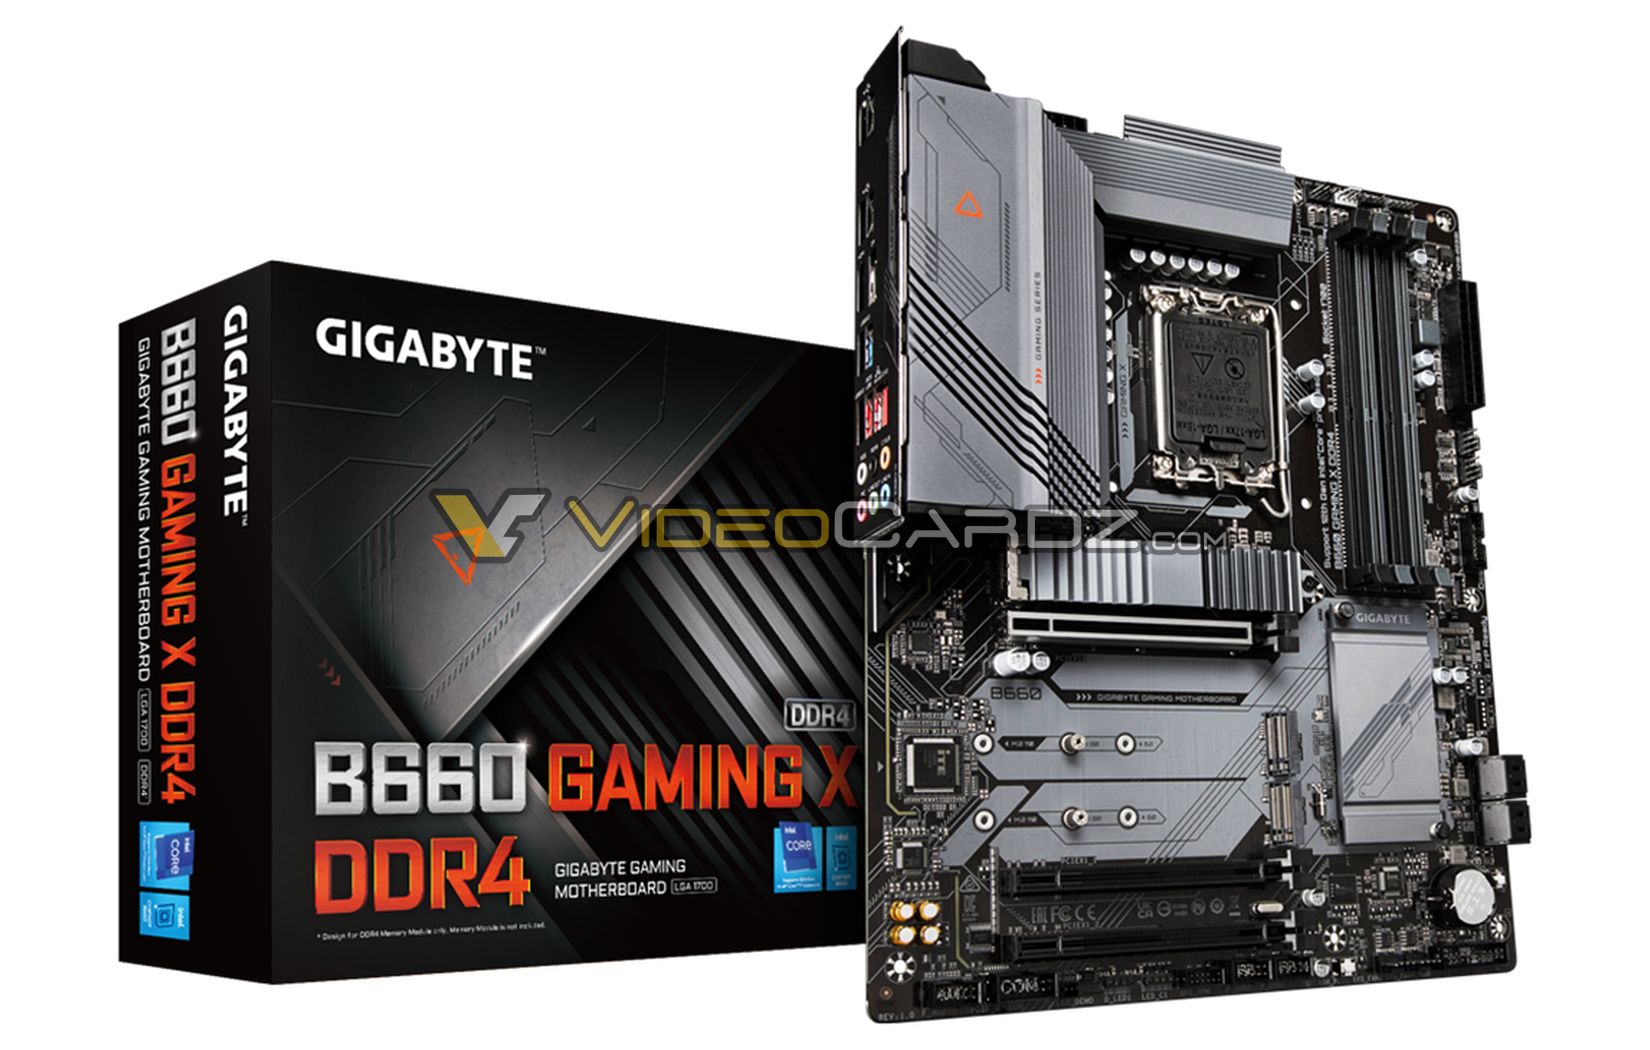 Gigabyte's mid-range Intel B660 Gaming X DDR4 motherboard pictured 